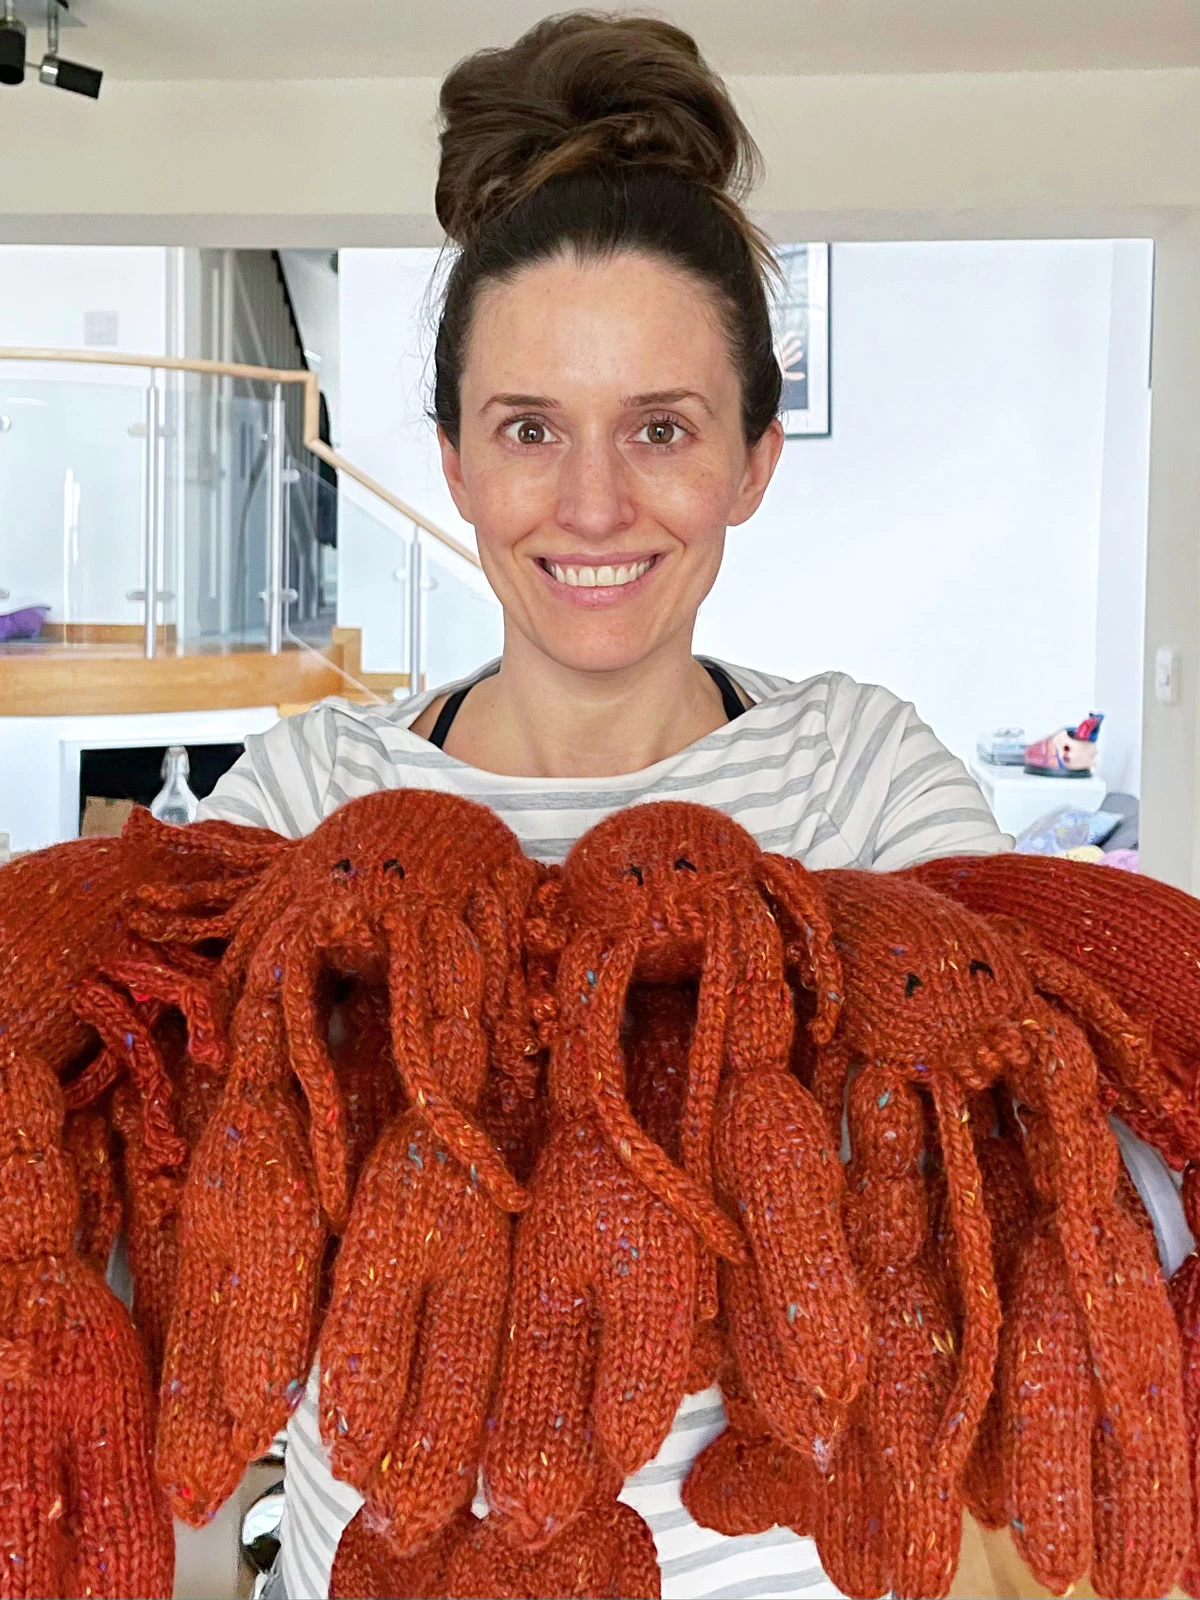 Karla holding toy lobsters she has knit